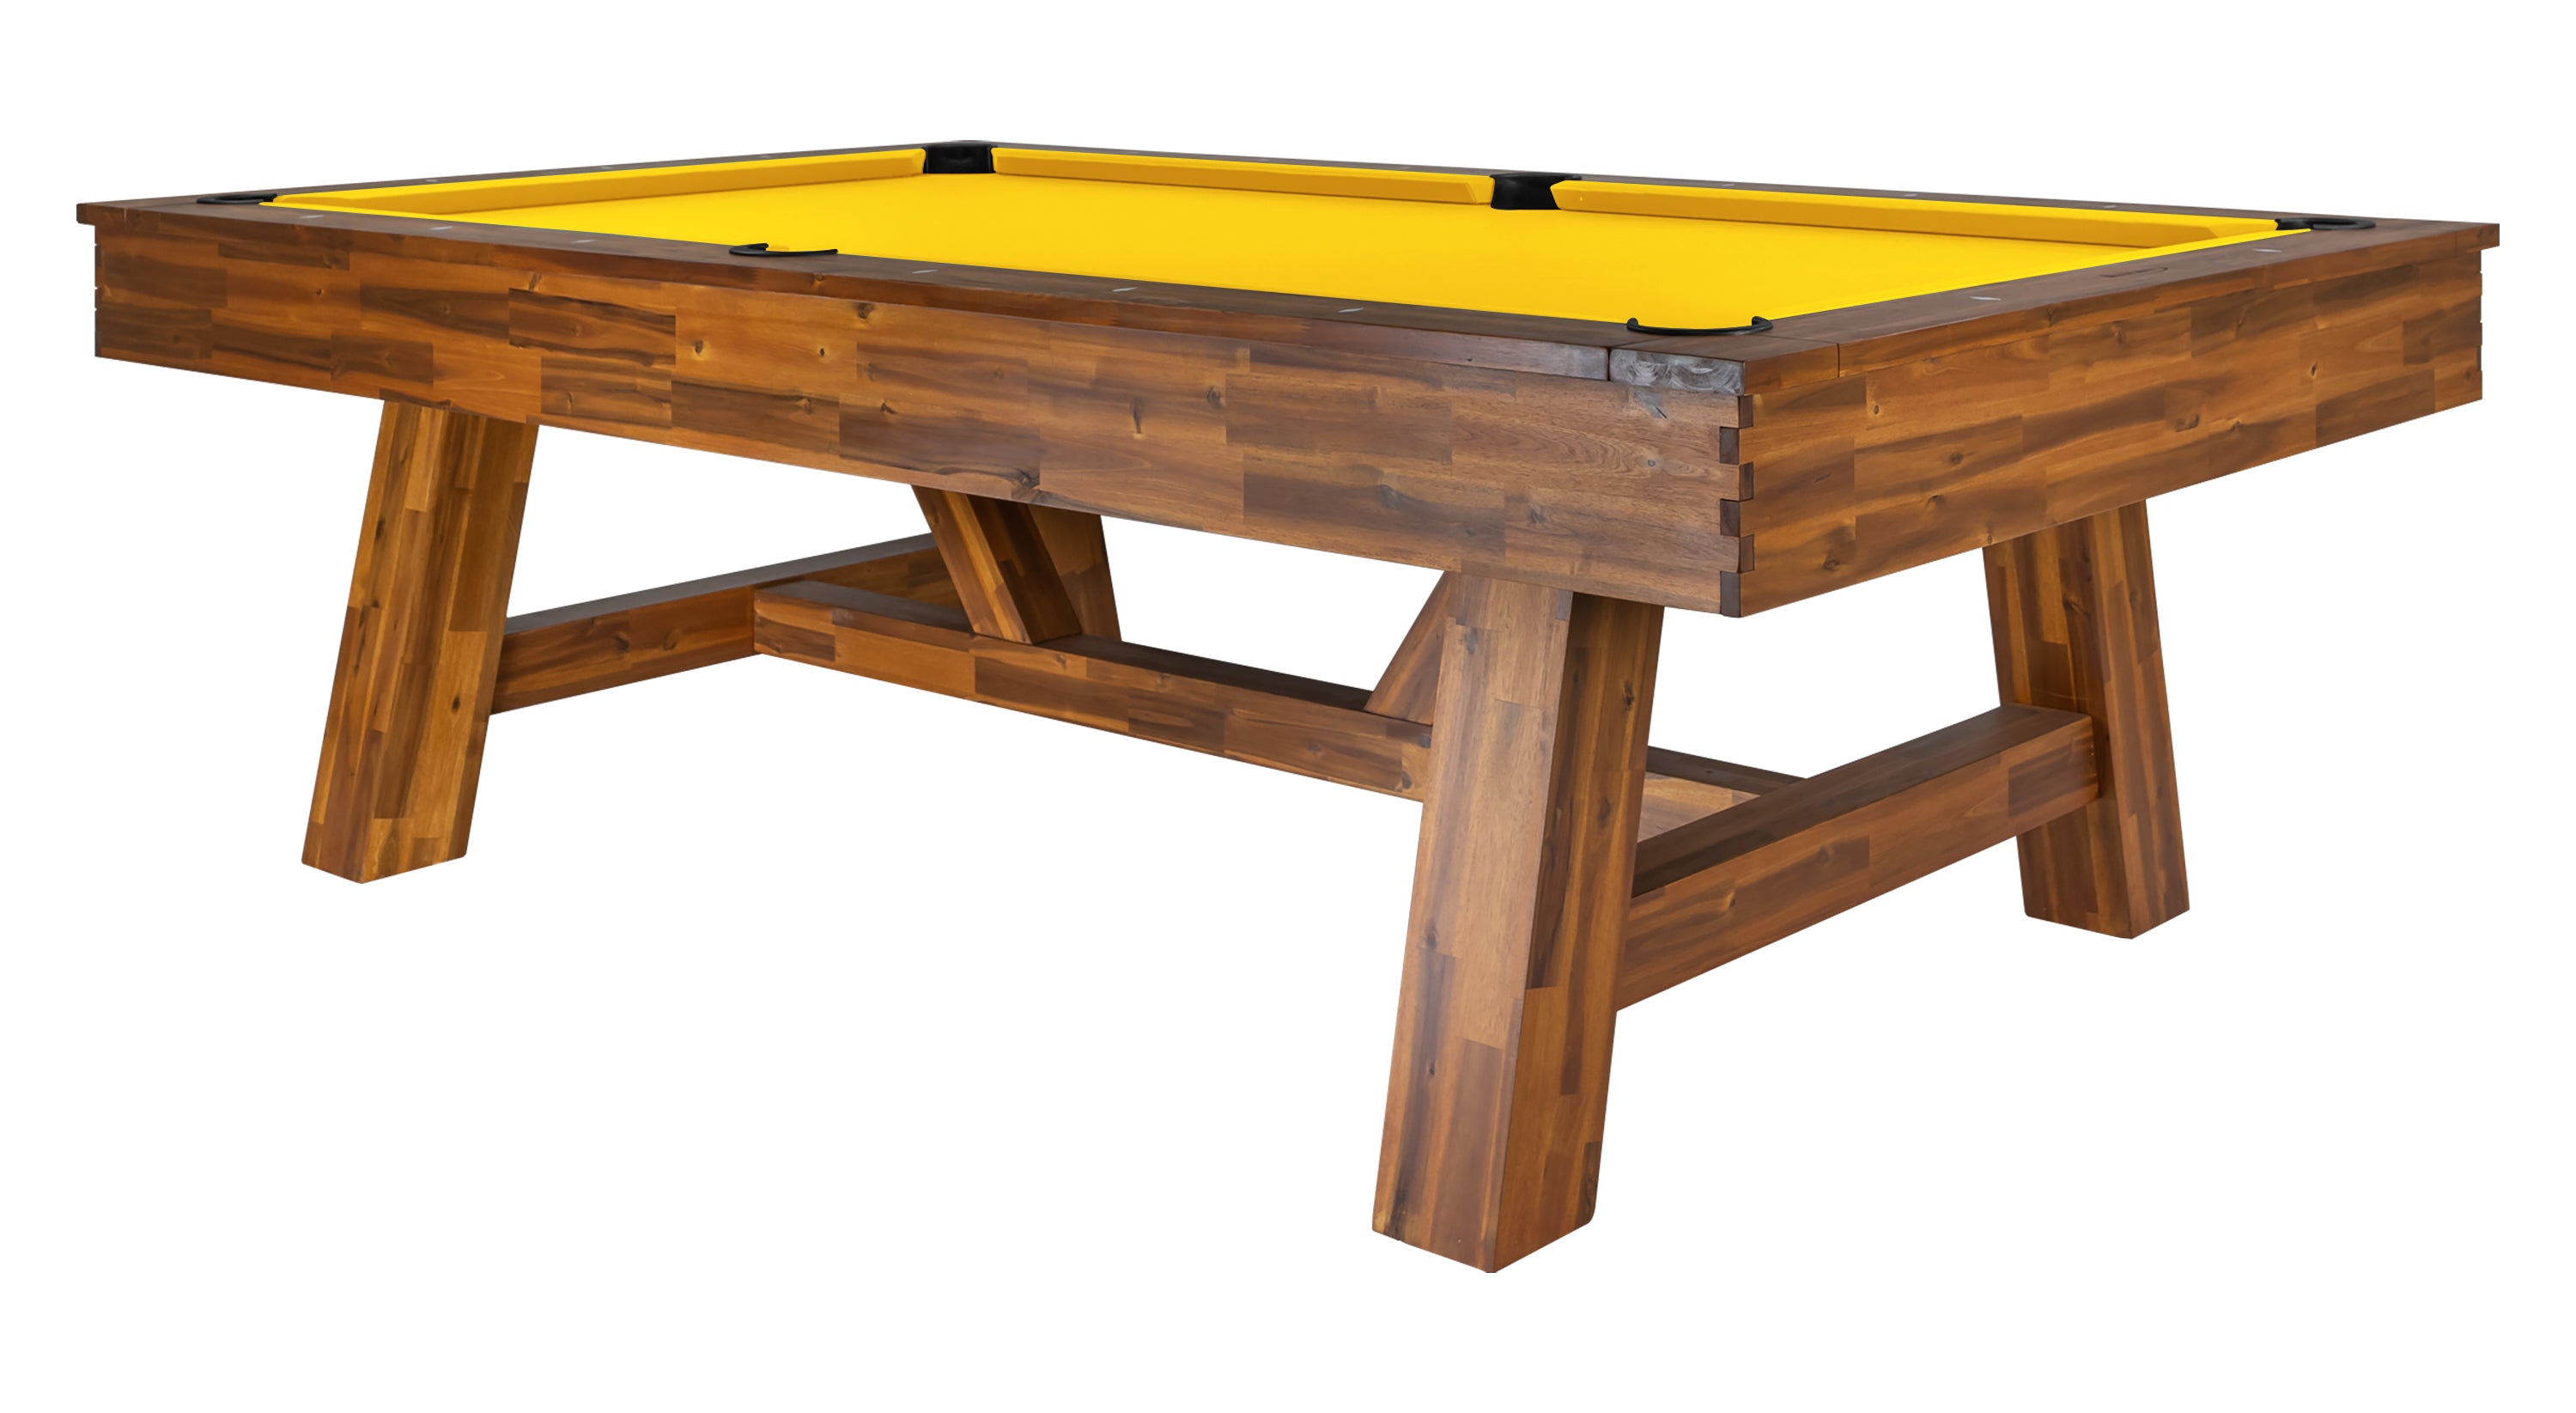 Legacy Billiards Emory 8 Ft Outdoor Pool Table in Natural Acacia Finish with Sunflower Cloth - Primary Image